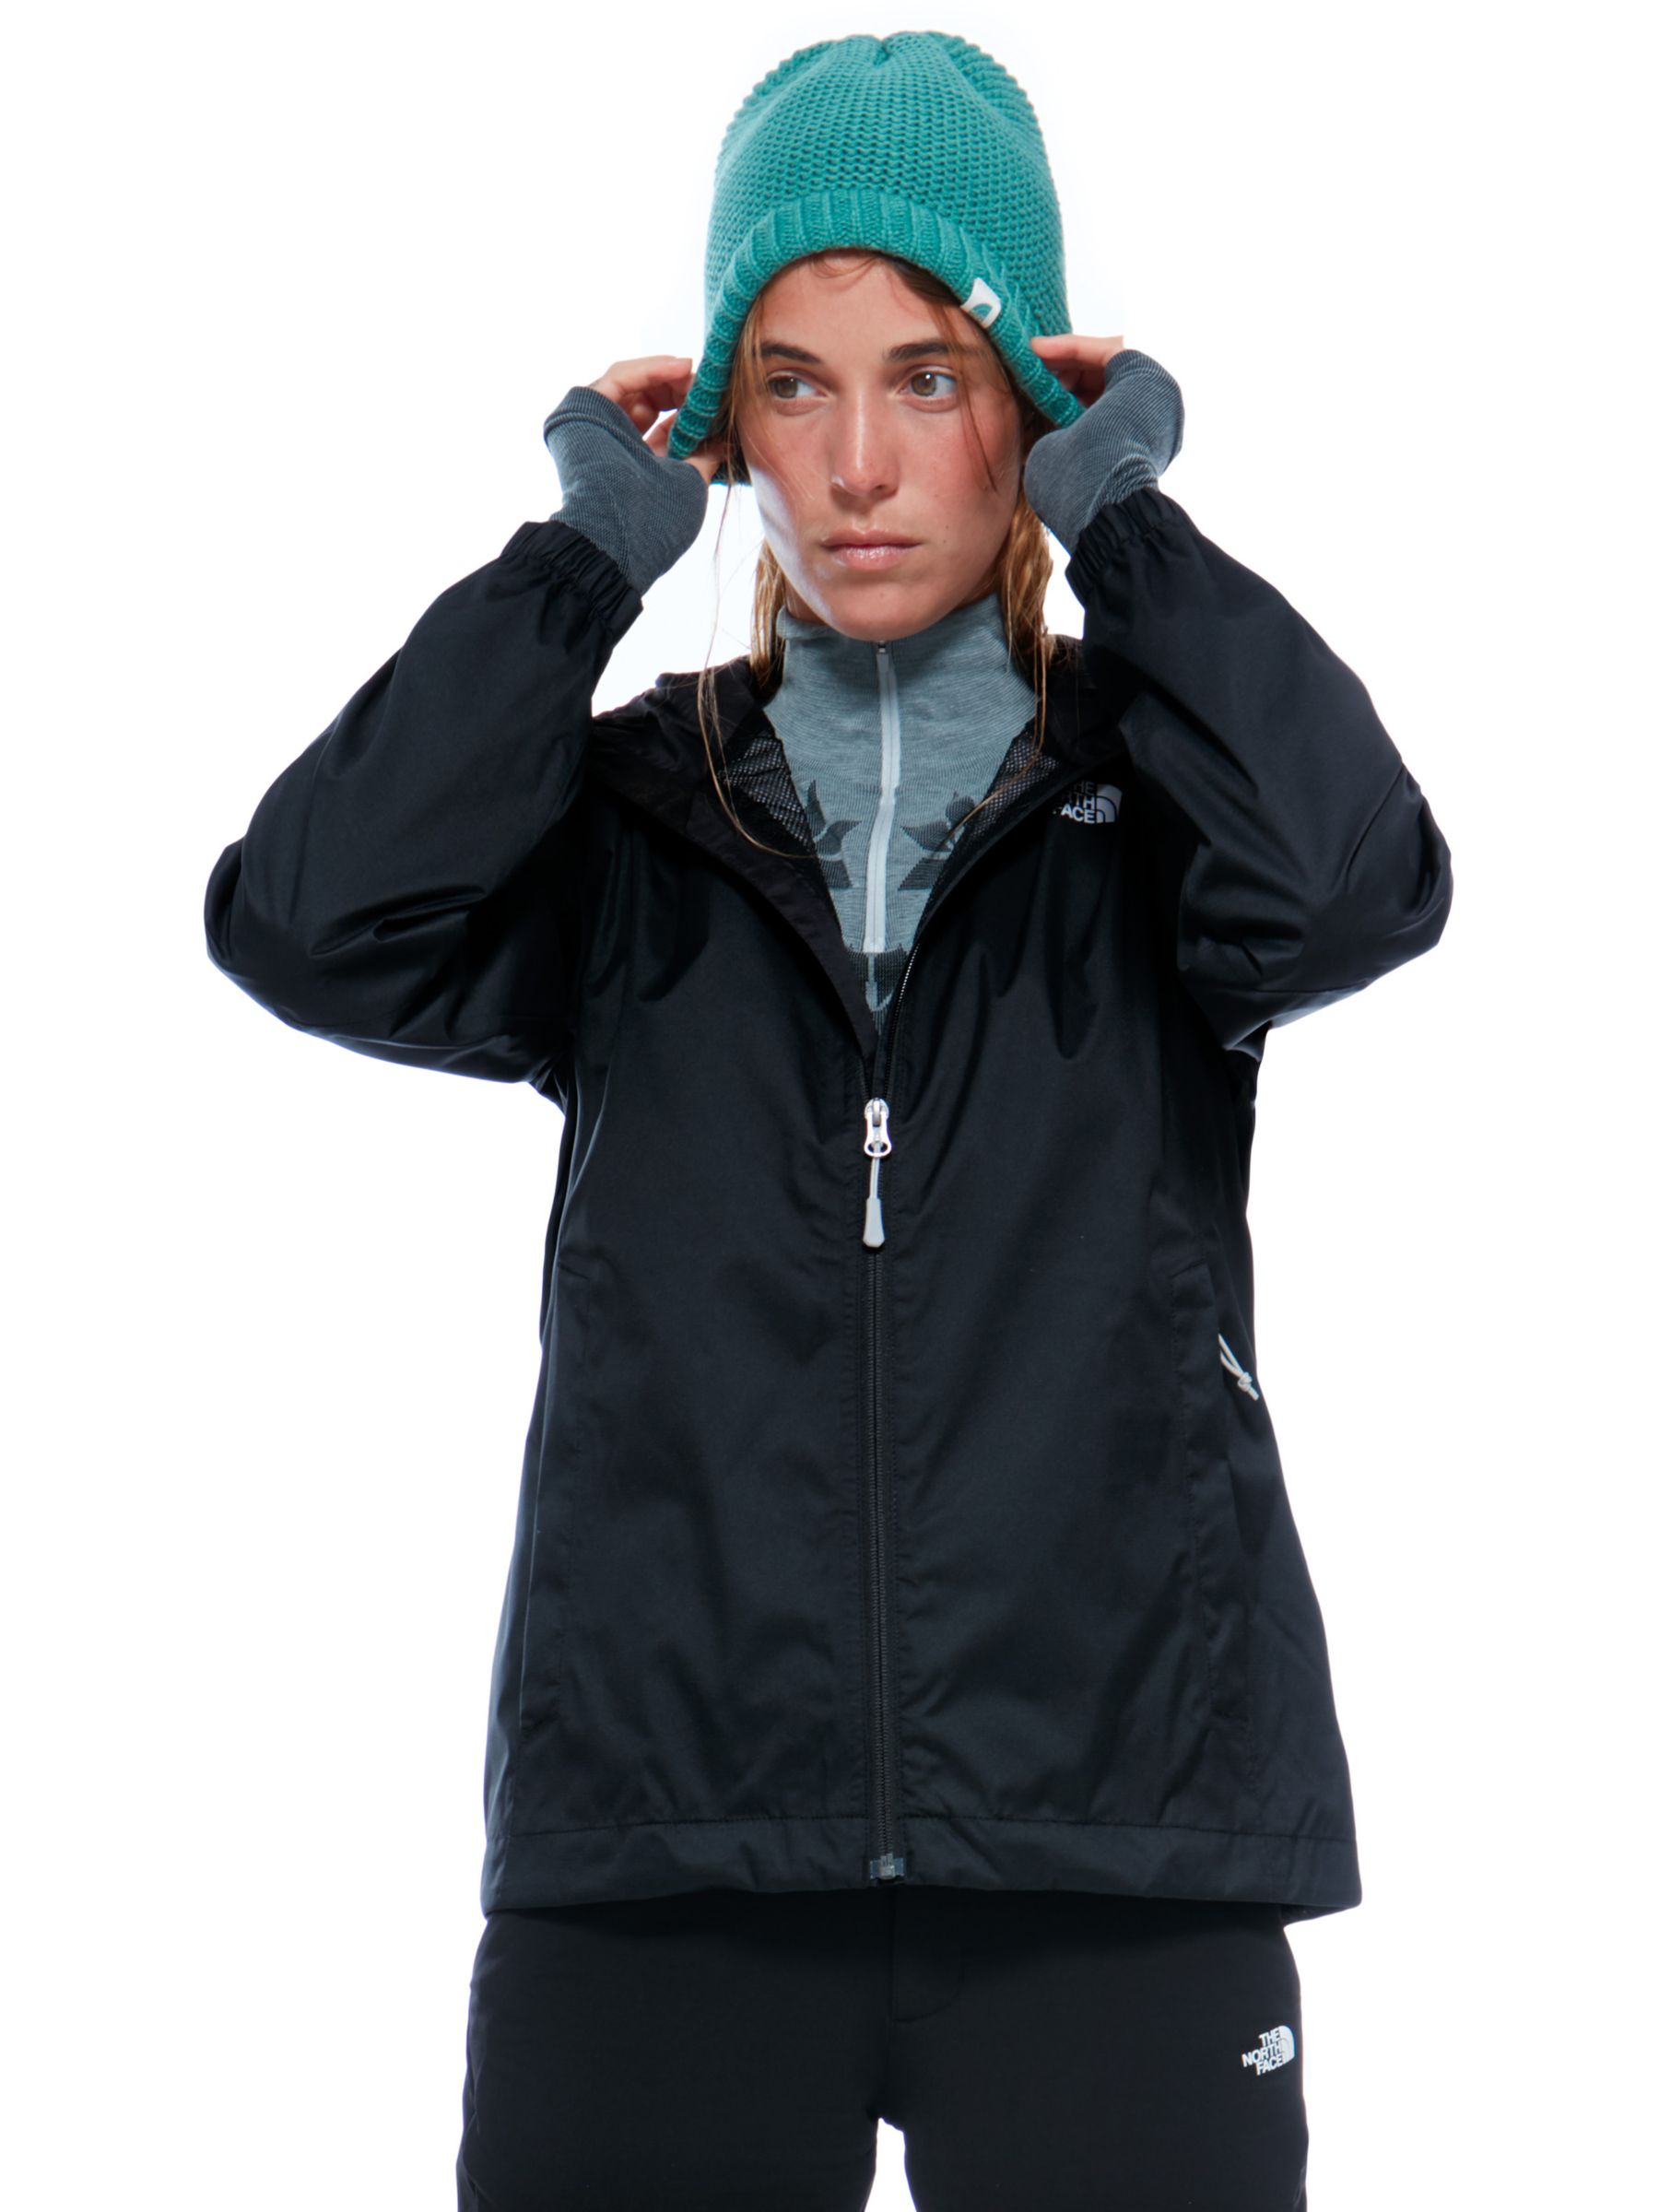 The North Face Quest Women's Waterproof Jacket, Black, M